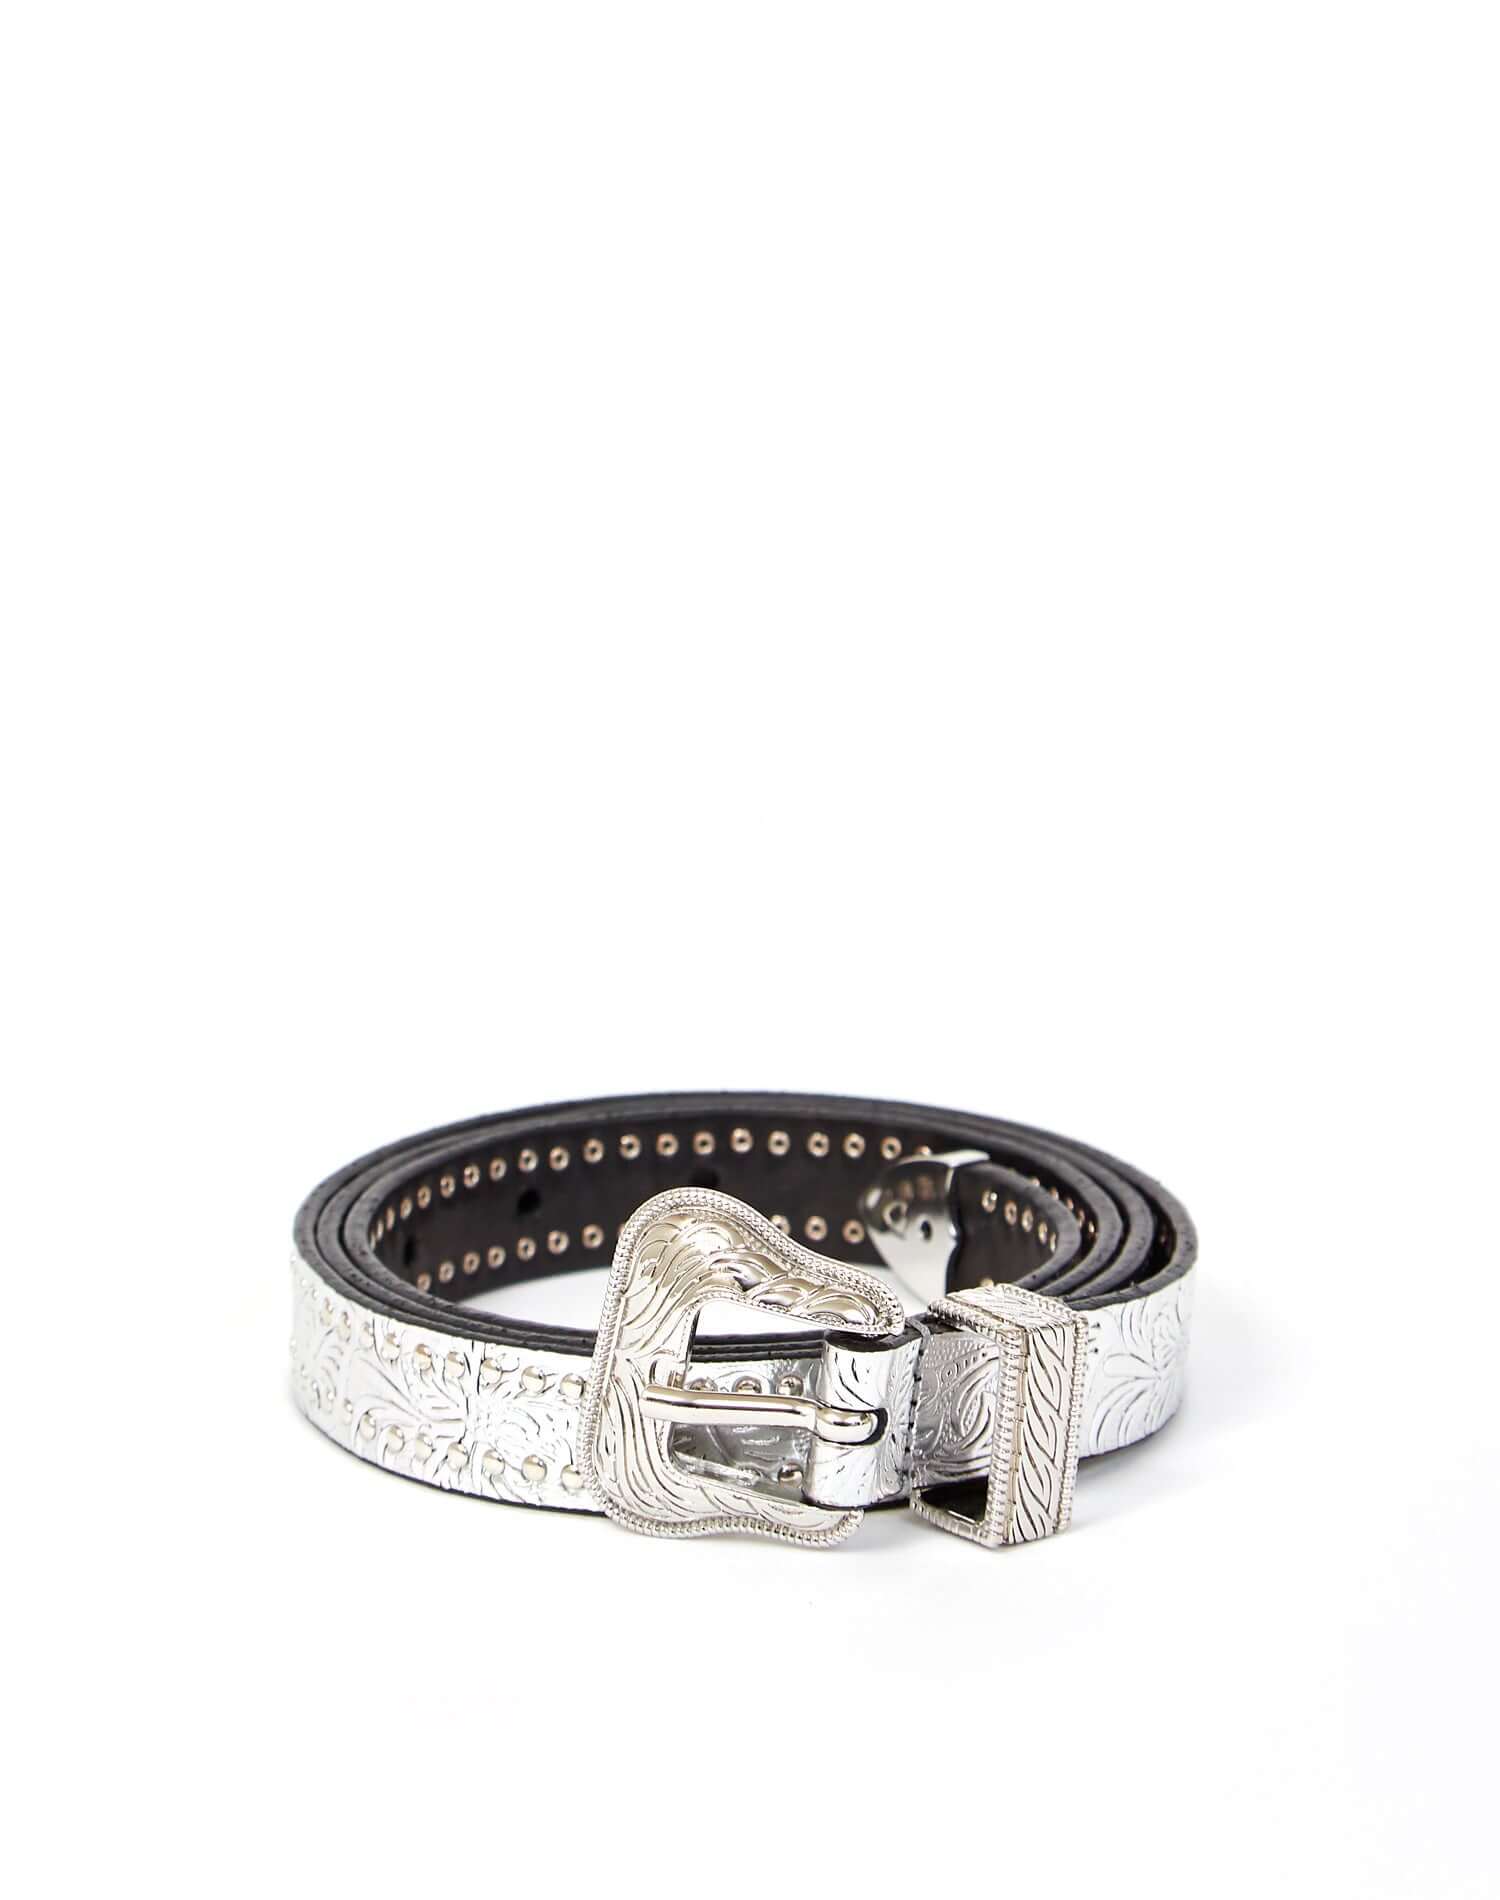 JOANA MINI BELT Silver leather belt with studs on the outline and carved details, buckle and belt loop in shiny metal. Height: 2 cm. Made in Italy. HTC LOS ANGELES